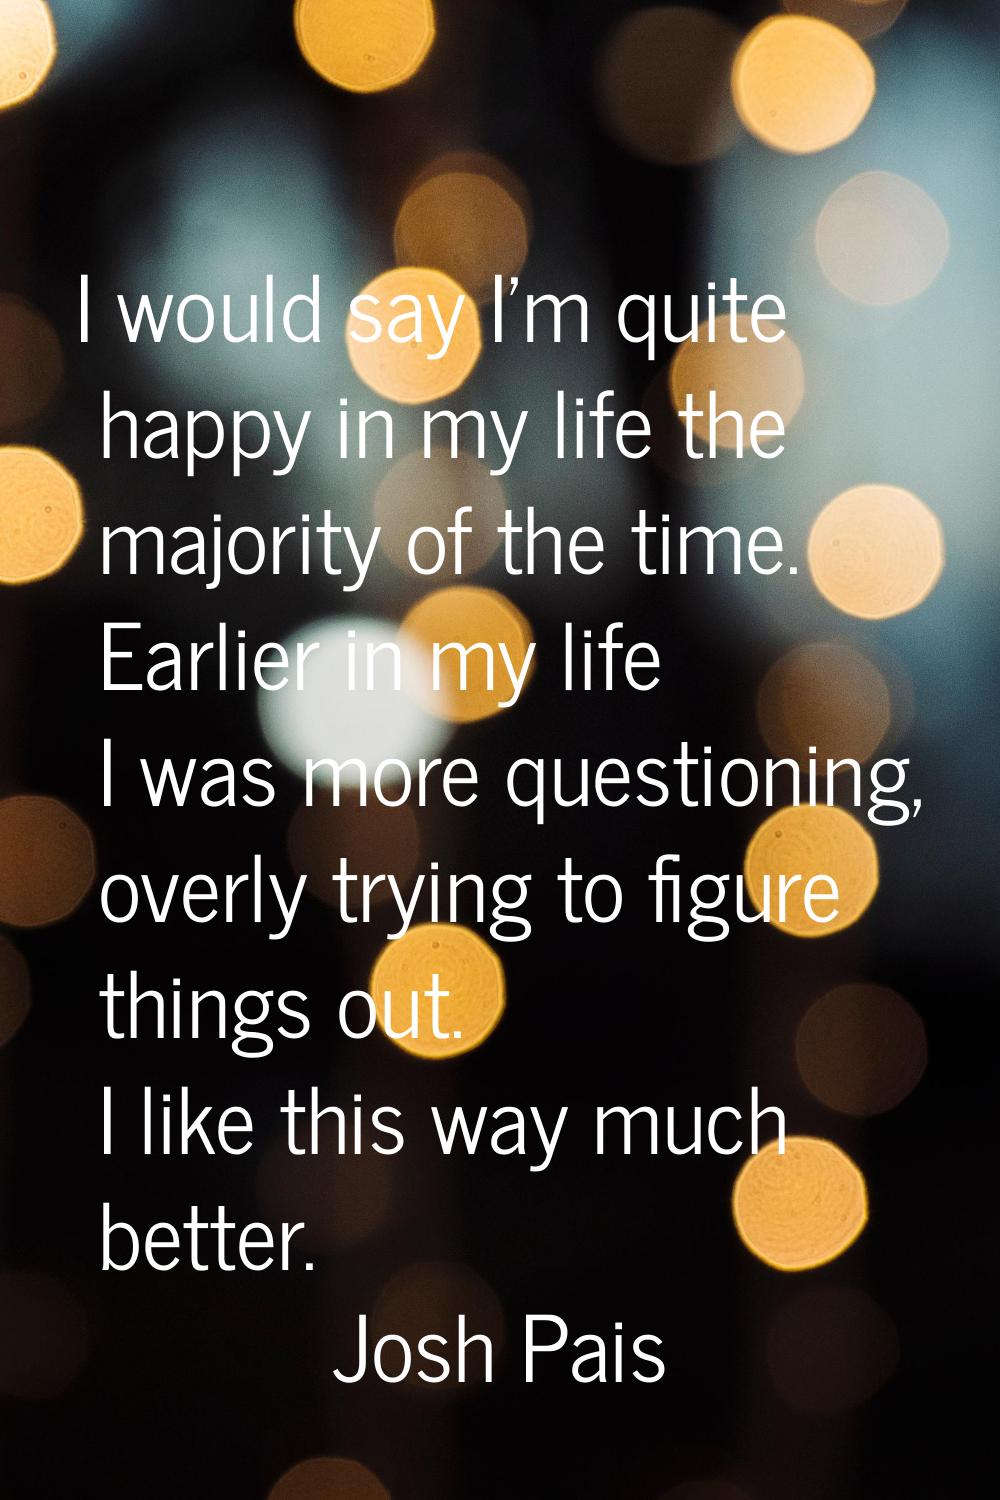 I would say I'm quite happy in my life the majority of the time. Earlier in my life I was more ques